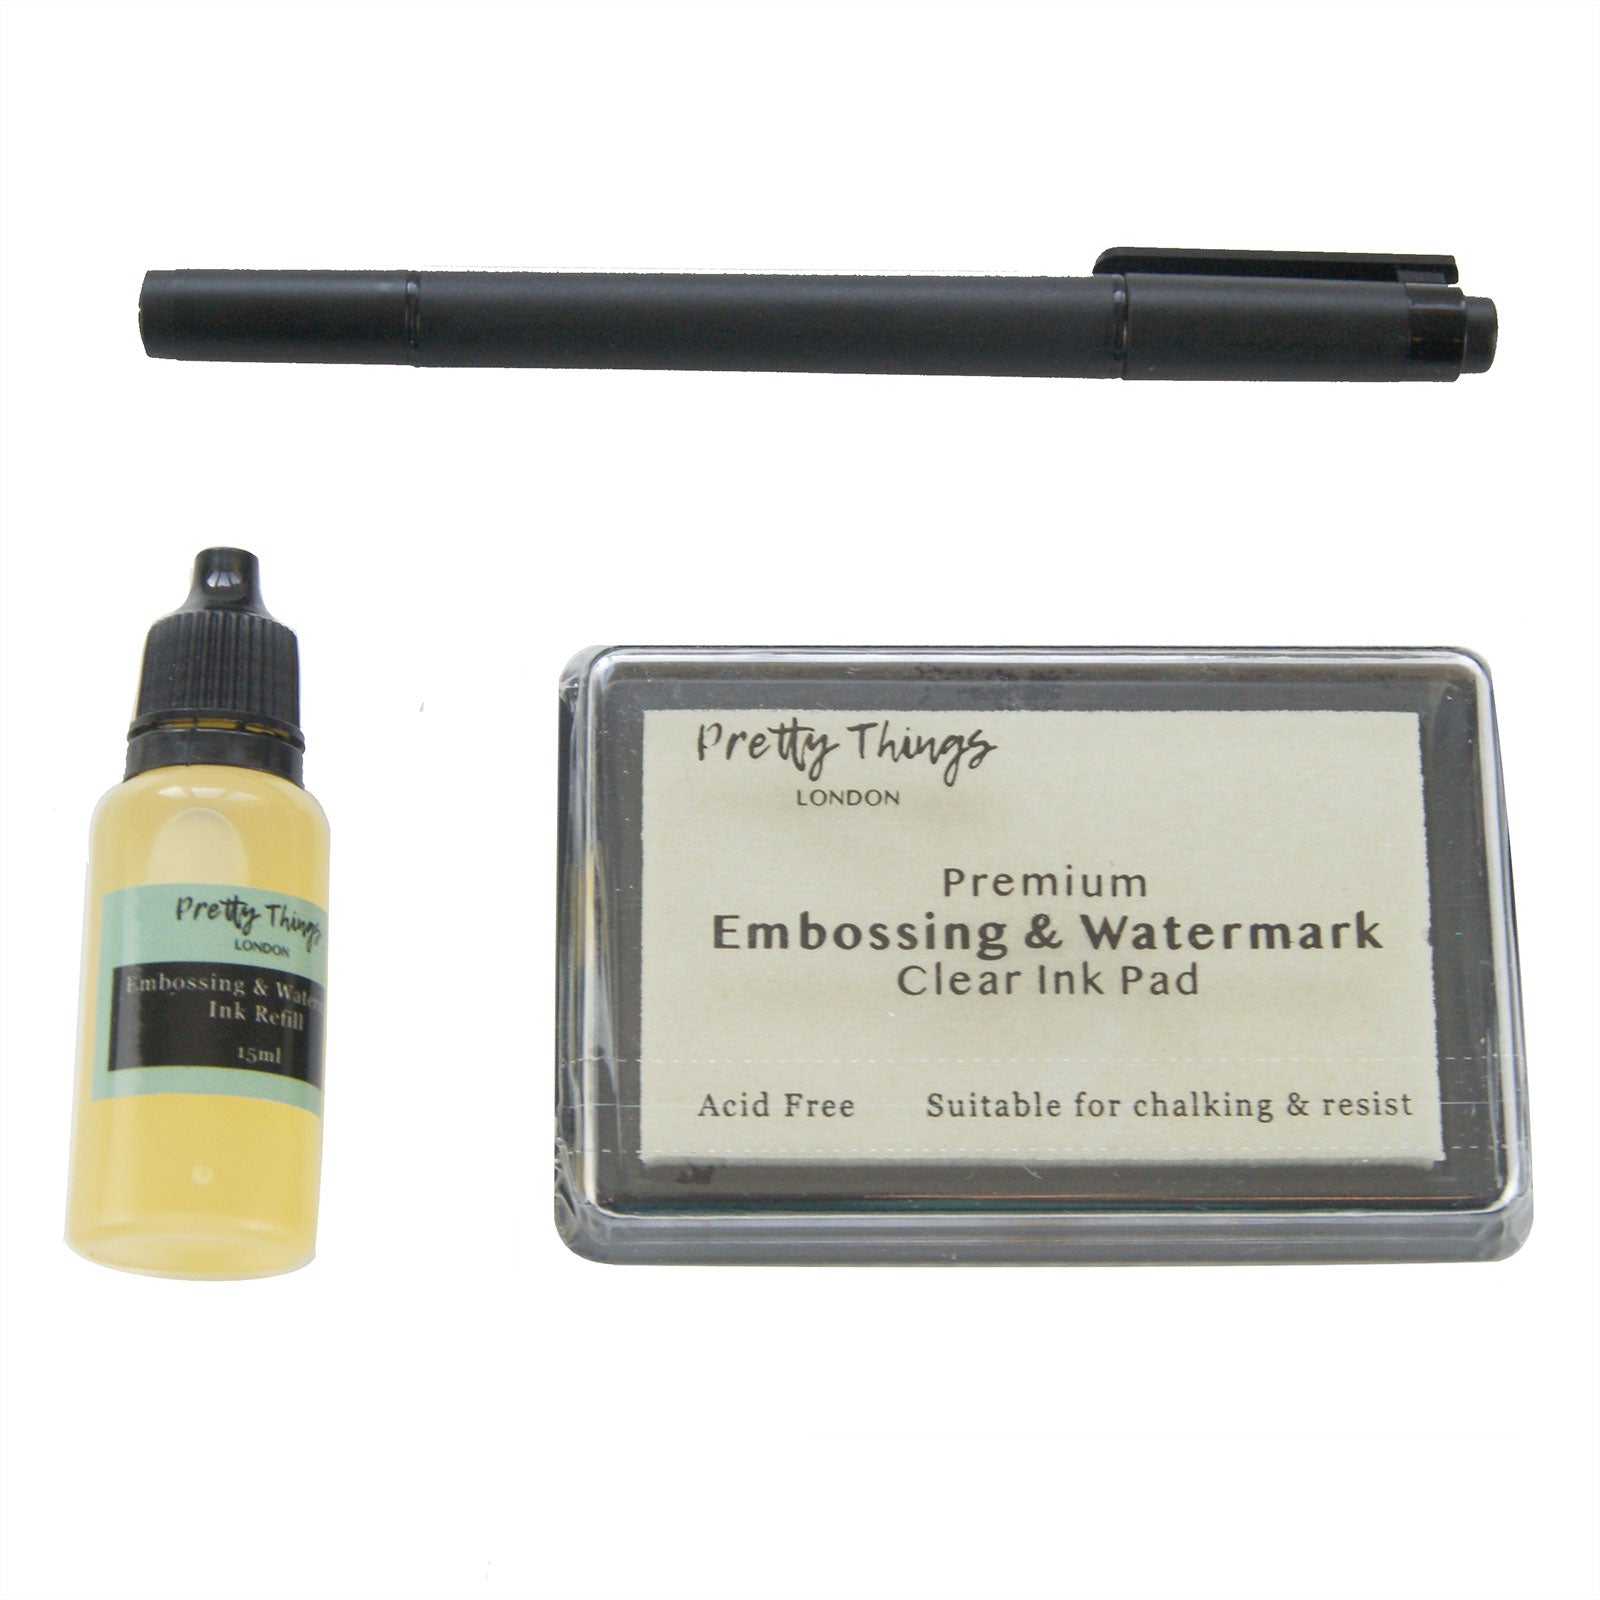 Heat embossing accessories: Clear ink stamp pad, Refill ink, dual tip pen